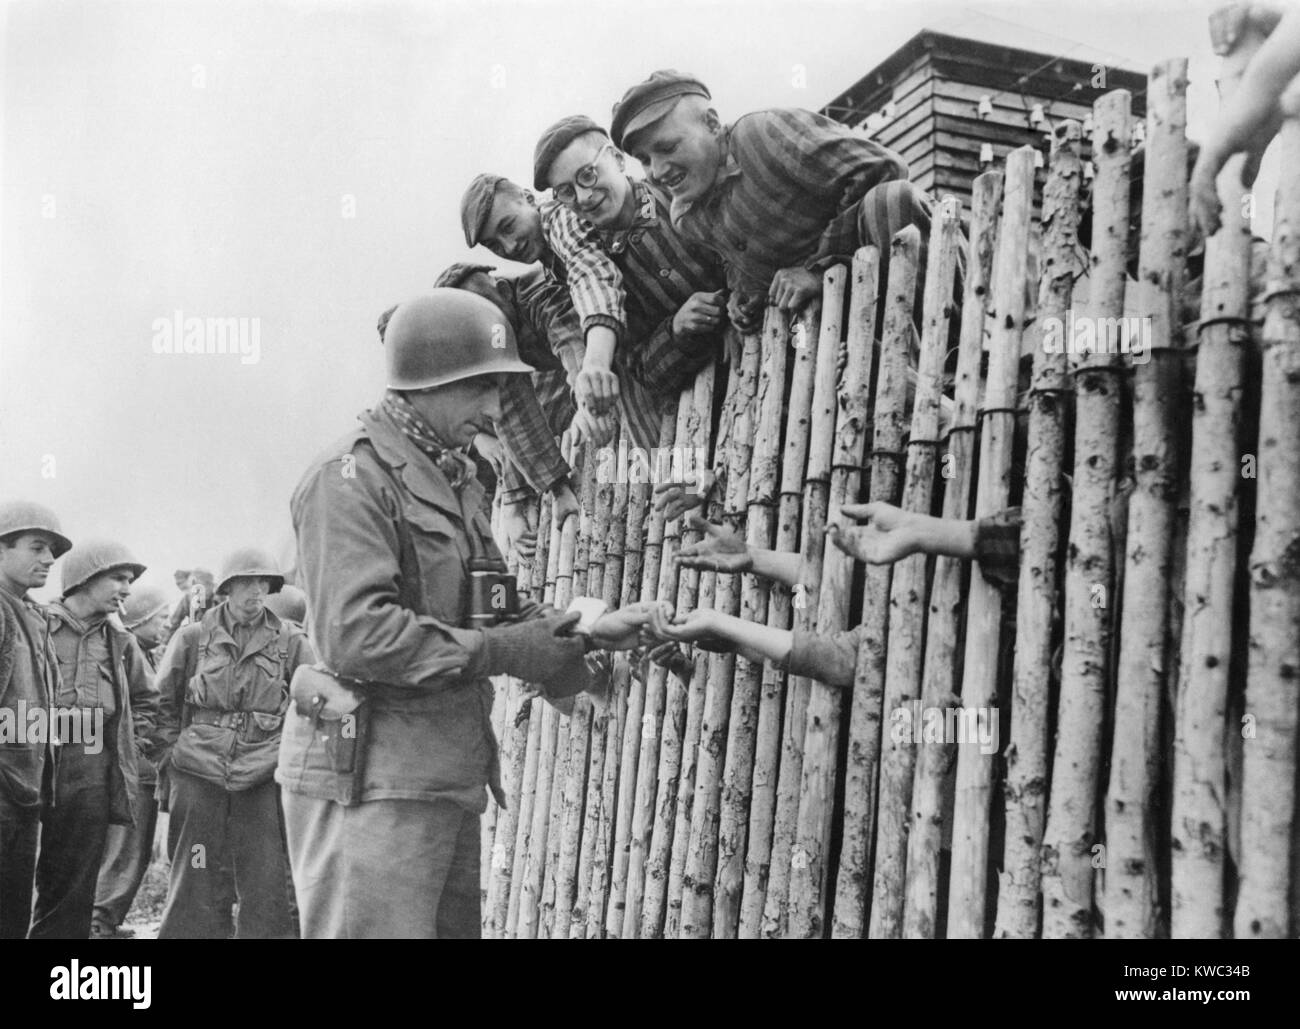 GI of the Seventh US Army gives his last cigarettes to liberated Dachau prisoners behind a stockade. April 29, 1945, World War 2 (BSLOC 2015 13 21) Stock Photo